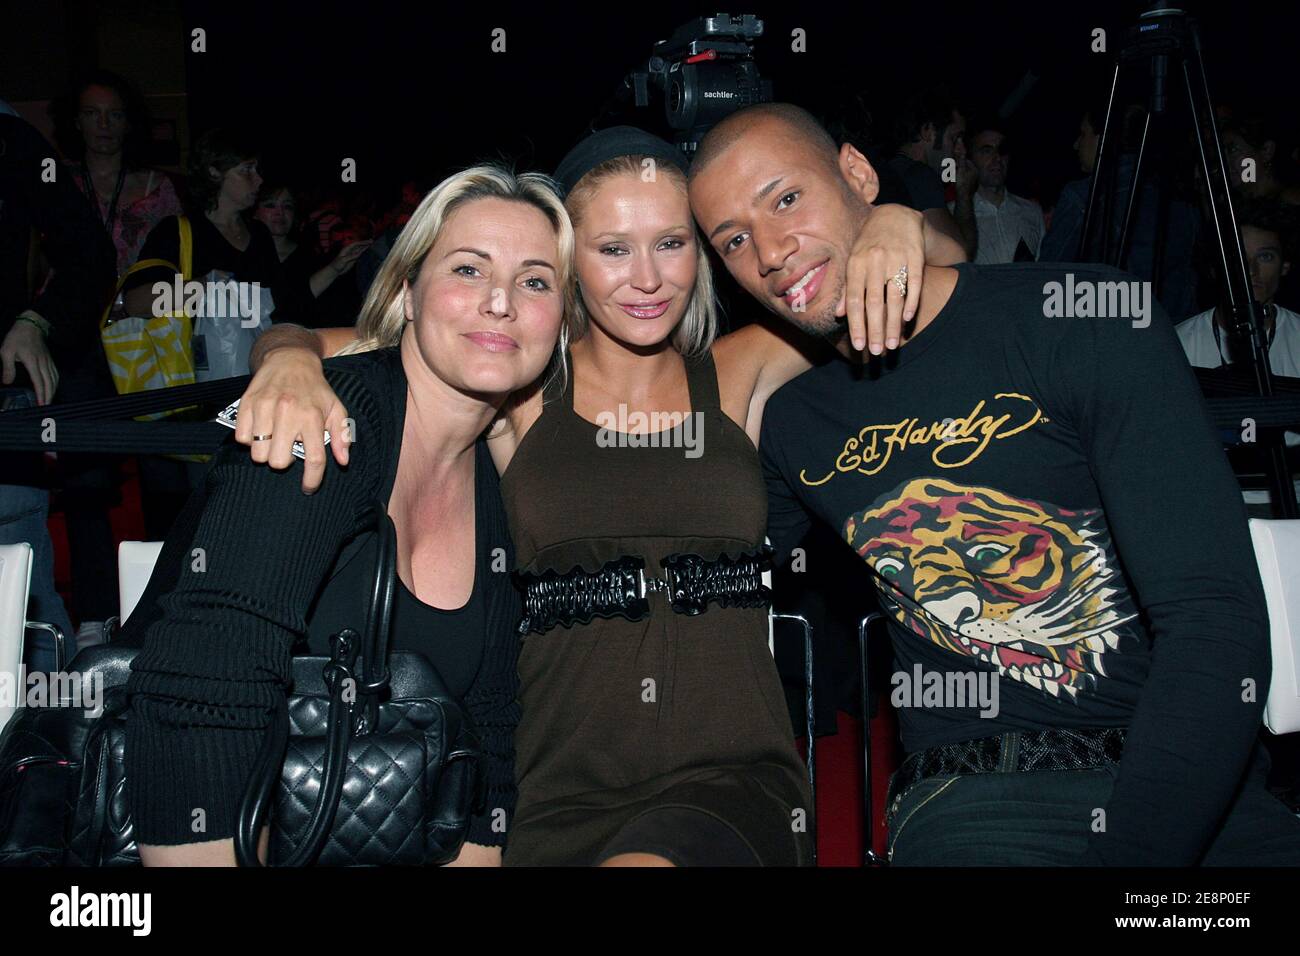 EXCLUSIVE - Sophie Favier withTatiana and Xavier from the TF1 TV show 'Secret Story' during the catwalk at 'who's next' exhibition in Paris, France, on September 9, 2007. Photo by Benoit Pinguet/ABACAPRESS.COM Stock Photo